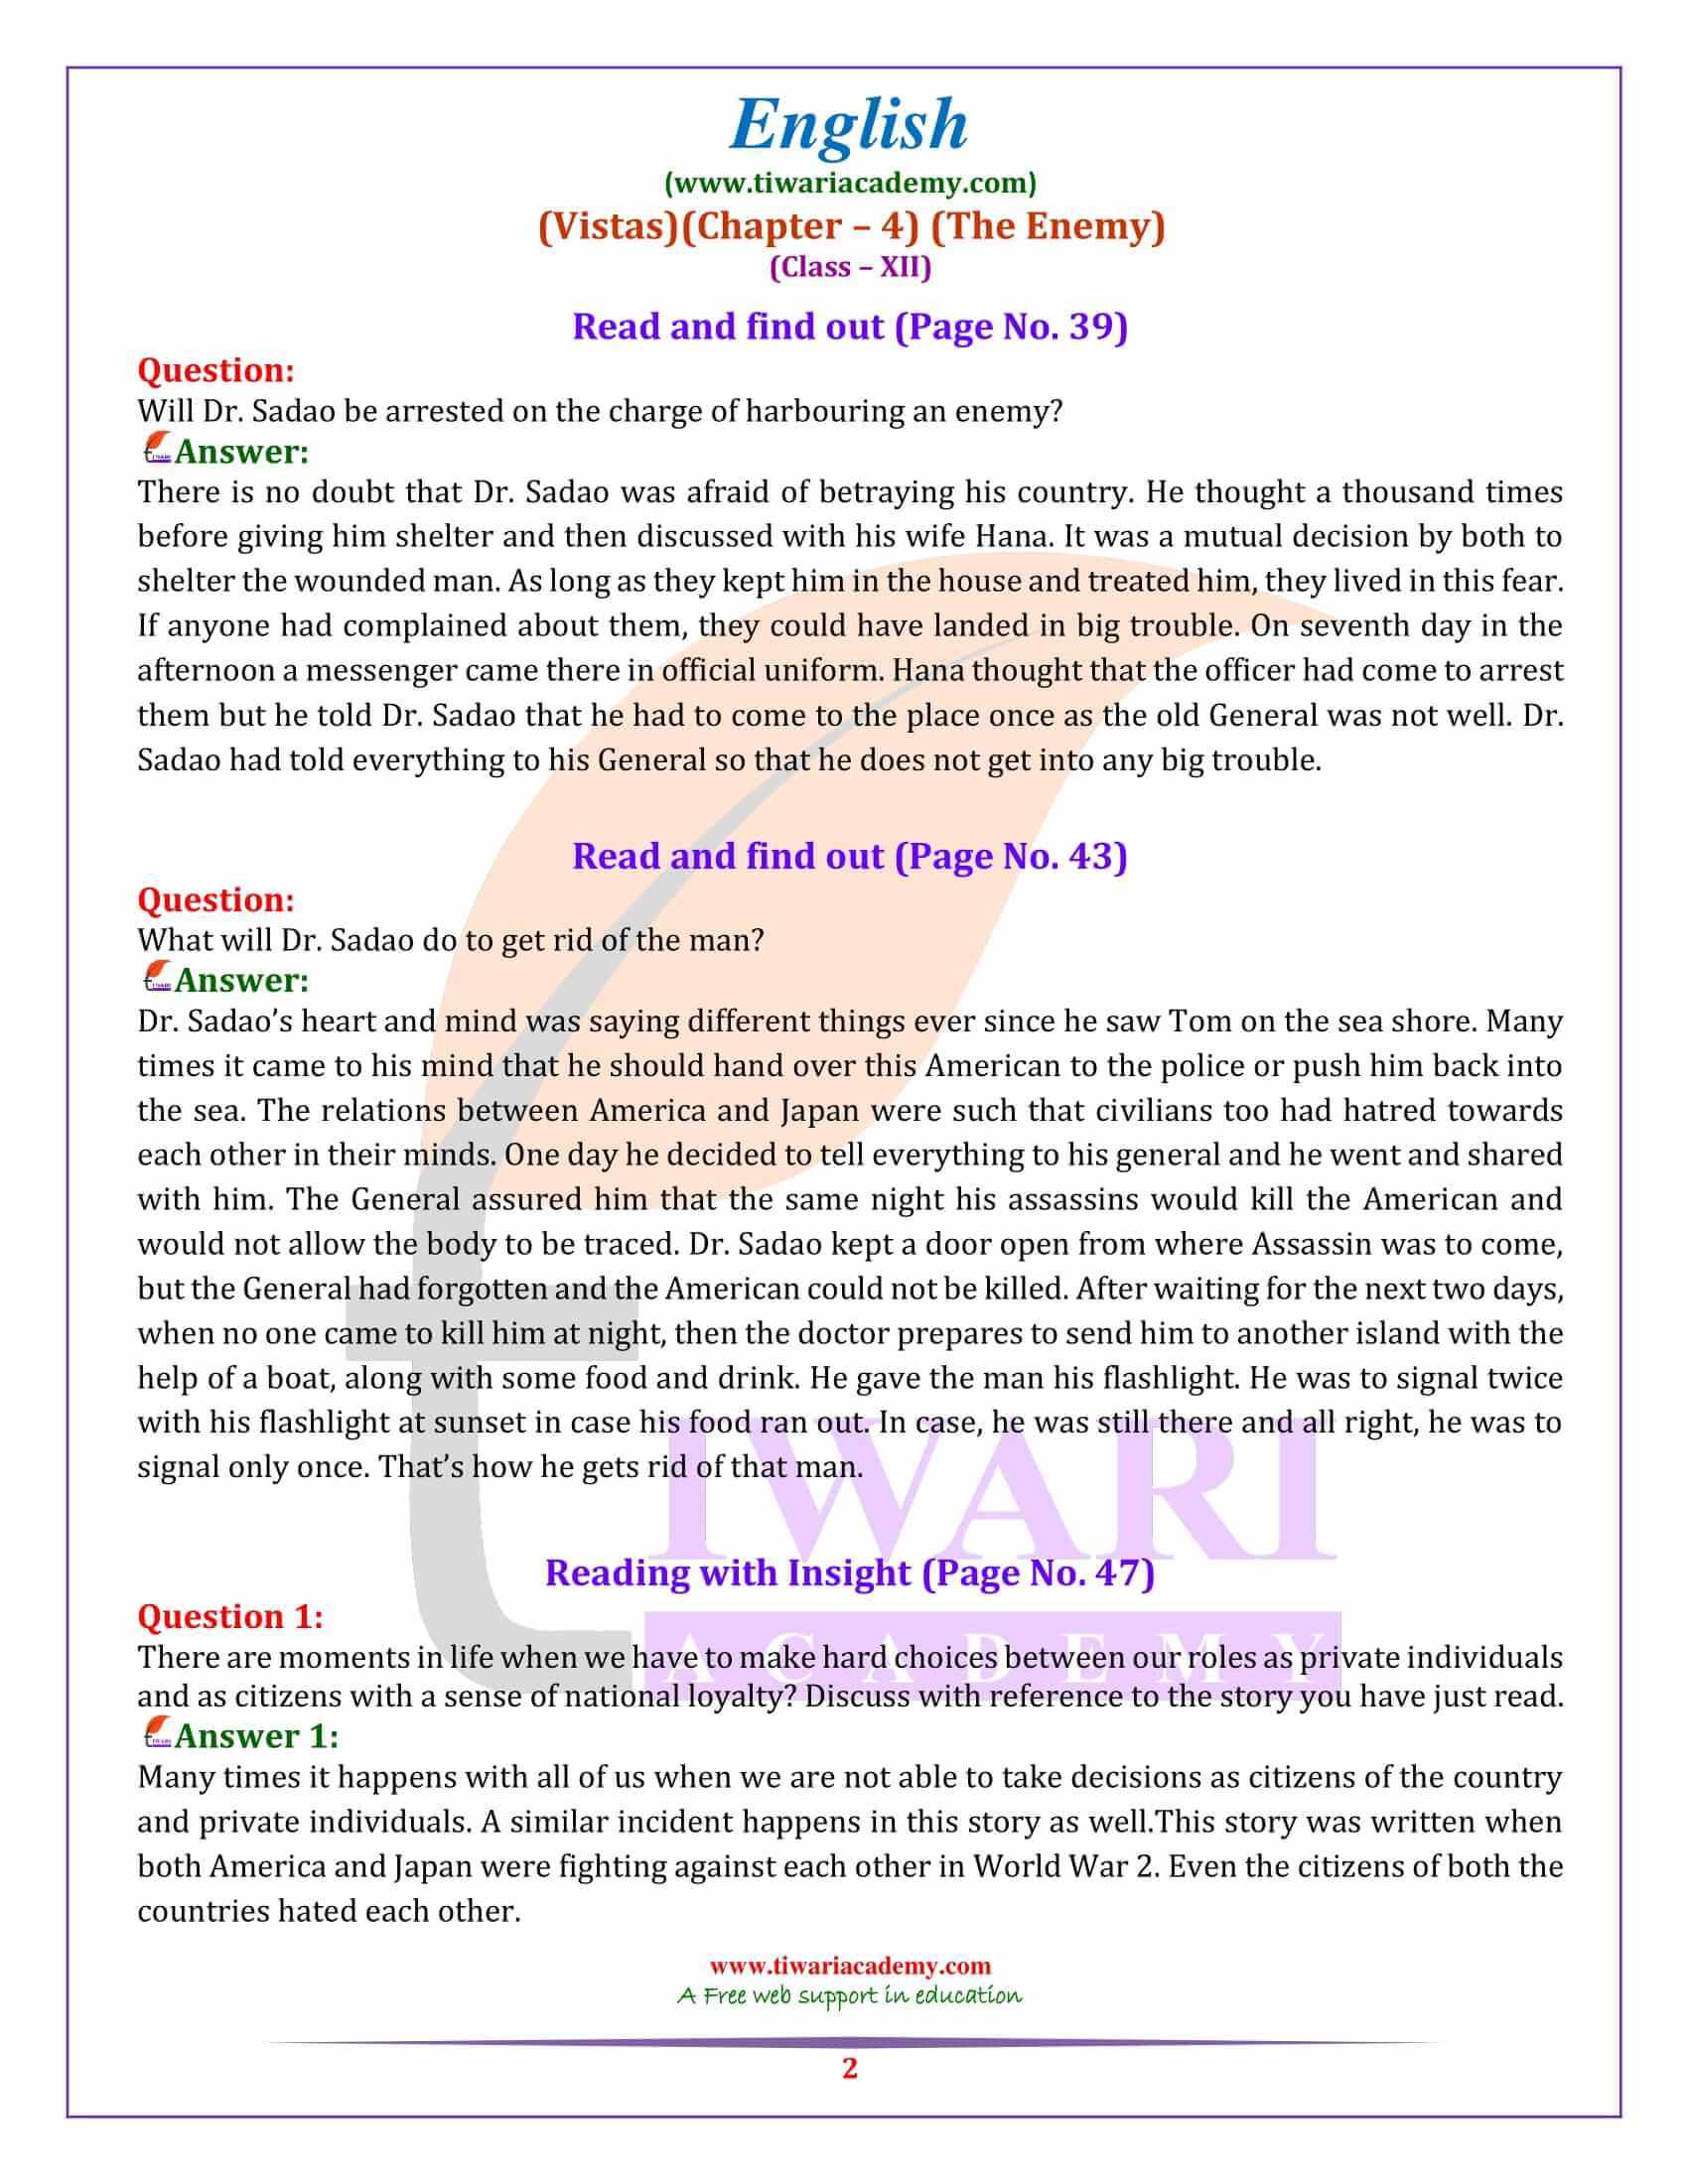 NCERT Solutions for Class 12 English Vistas Chapter 4